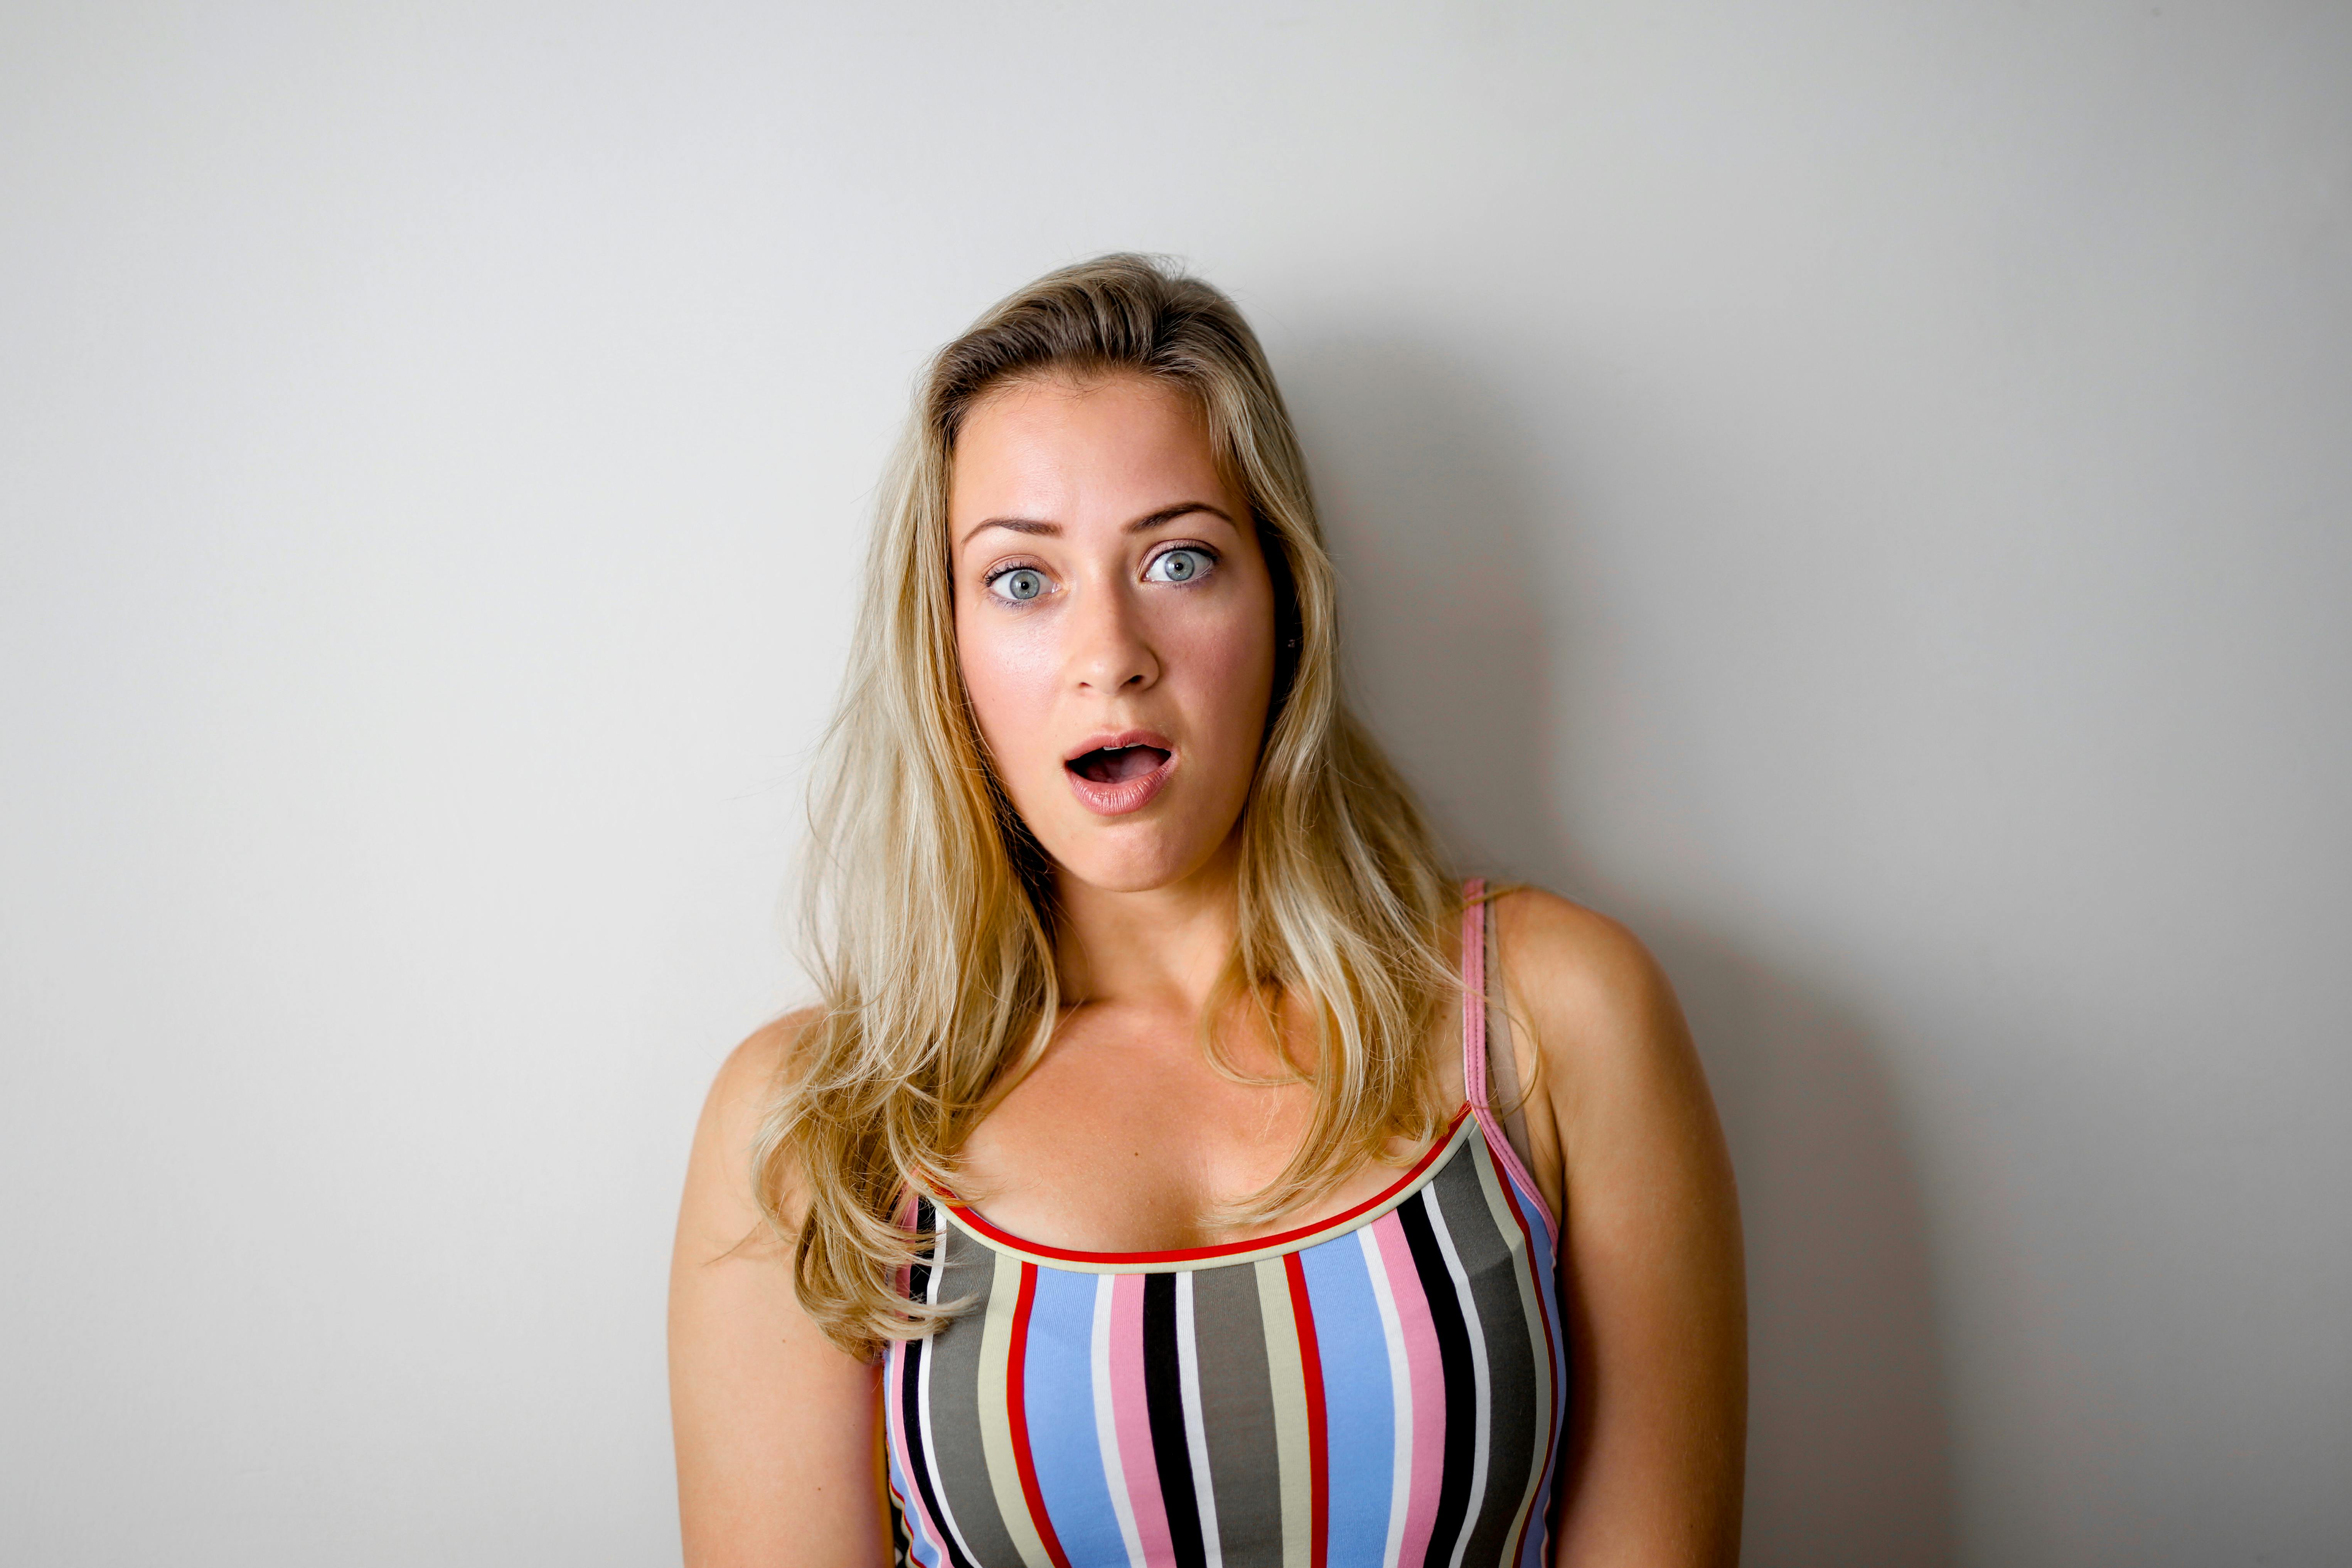 Shocked woman with an open mouth | Source: Pexels